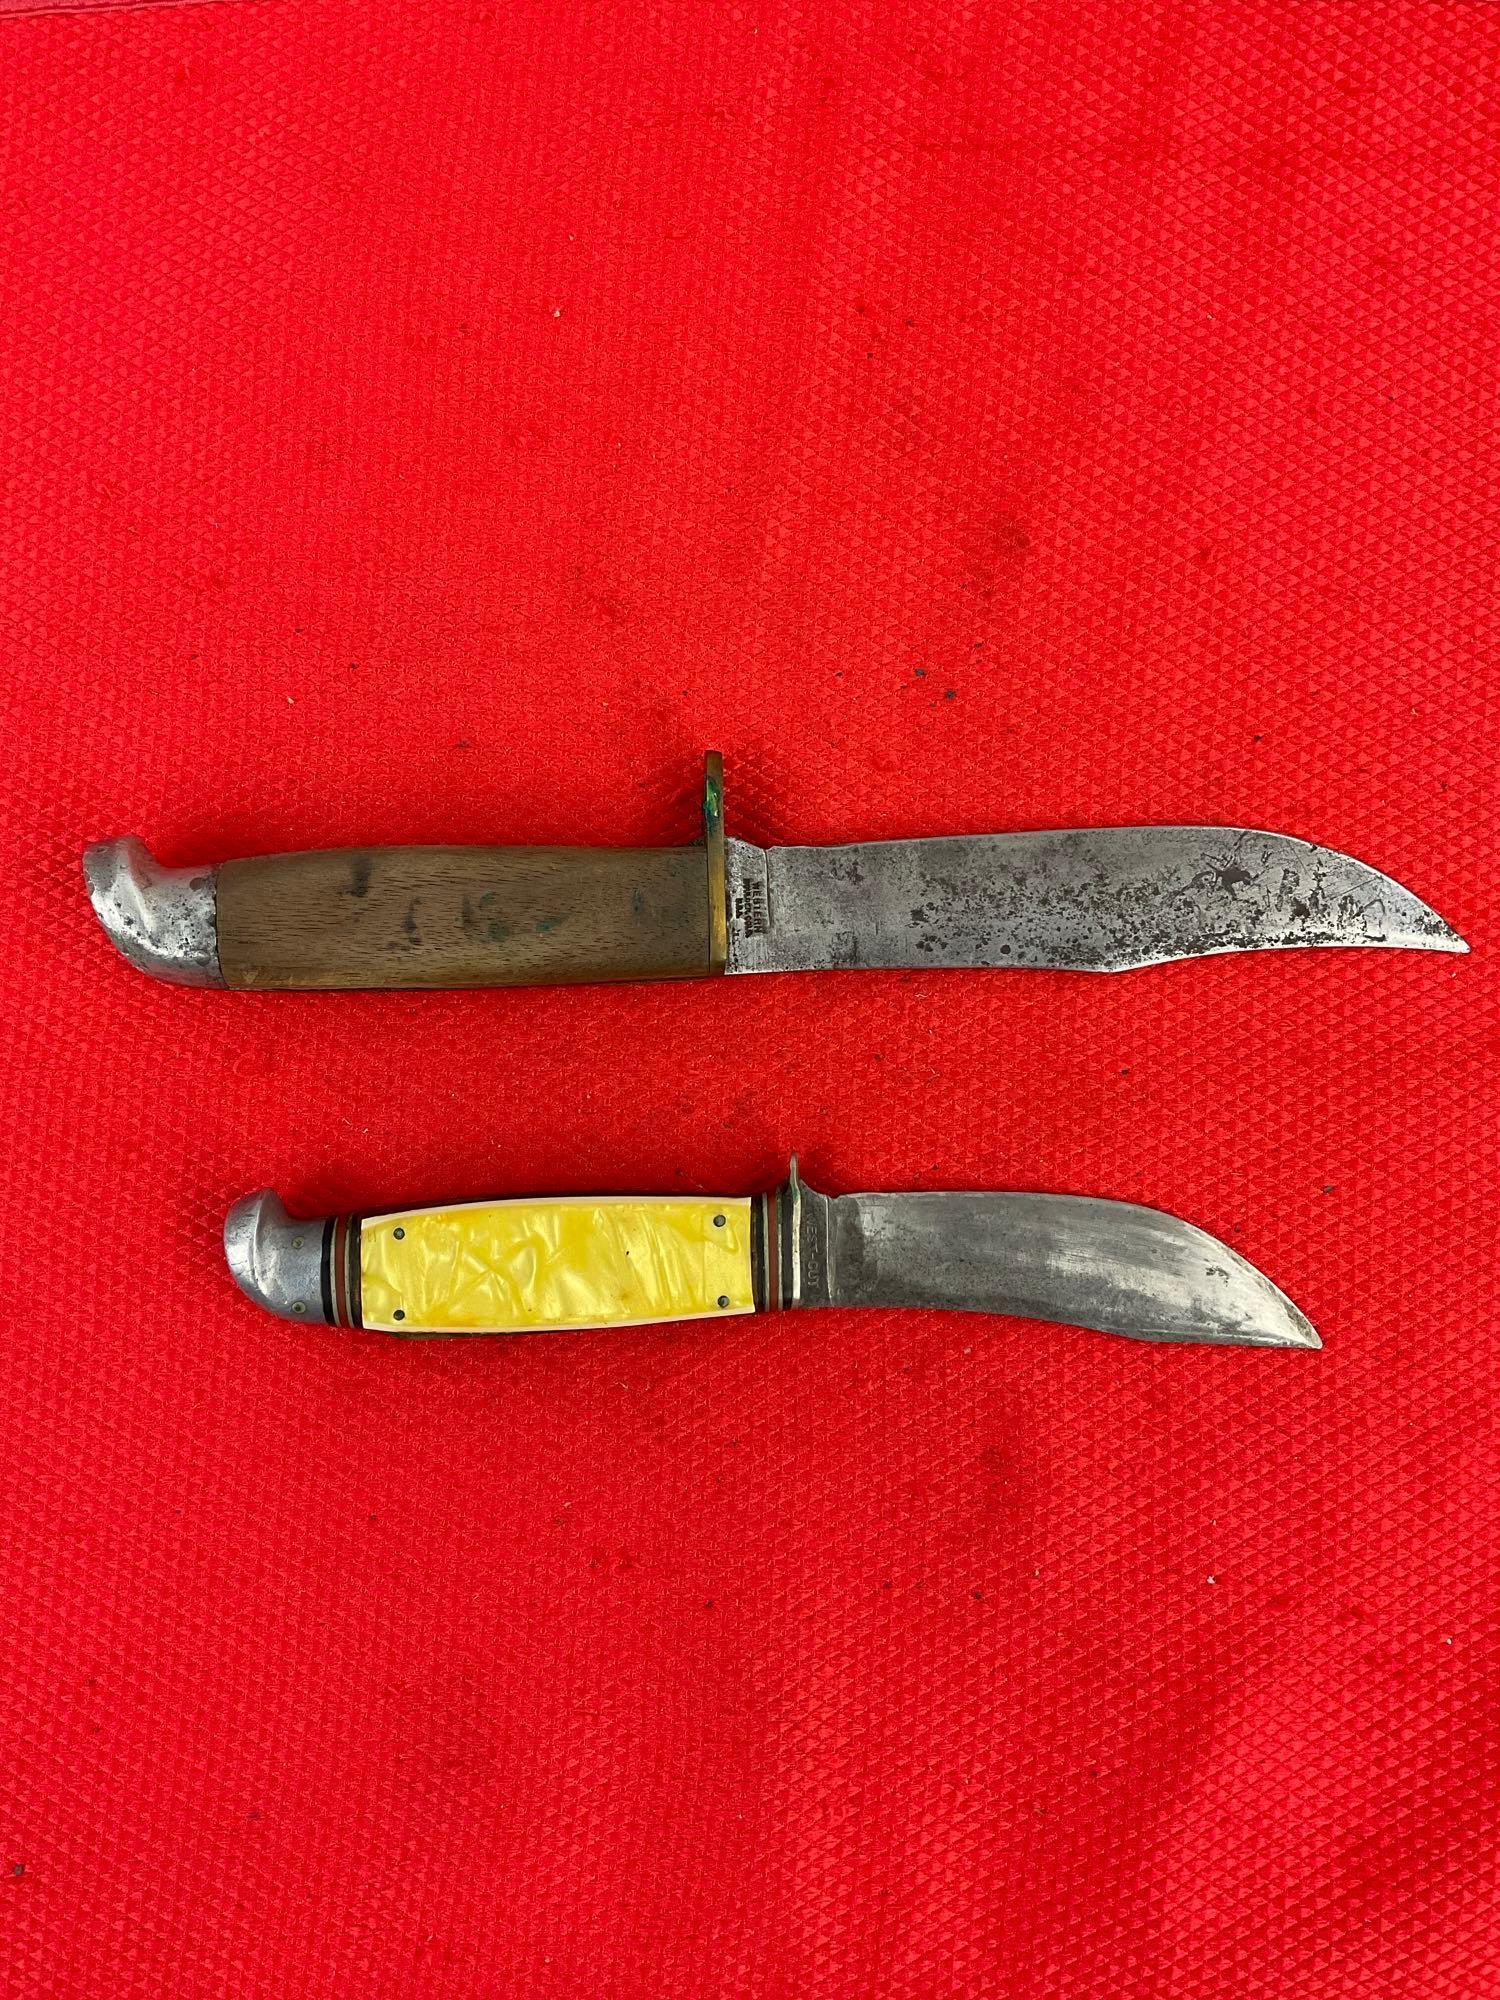 2 pcs Vintage Steel Fixed Blade Hunting Knives. 1x Western L36 Bowie, 1x West-Cut Skinner. See pi...